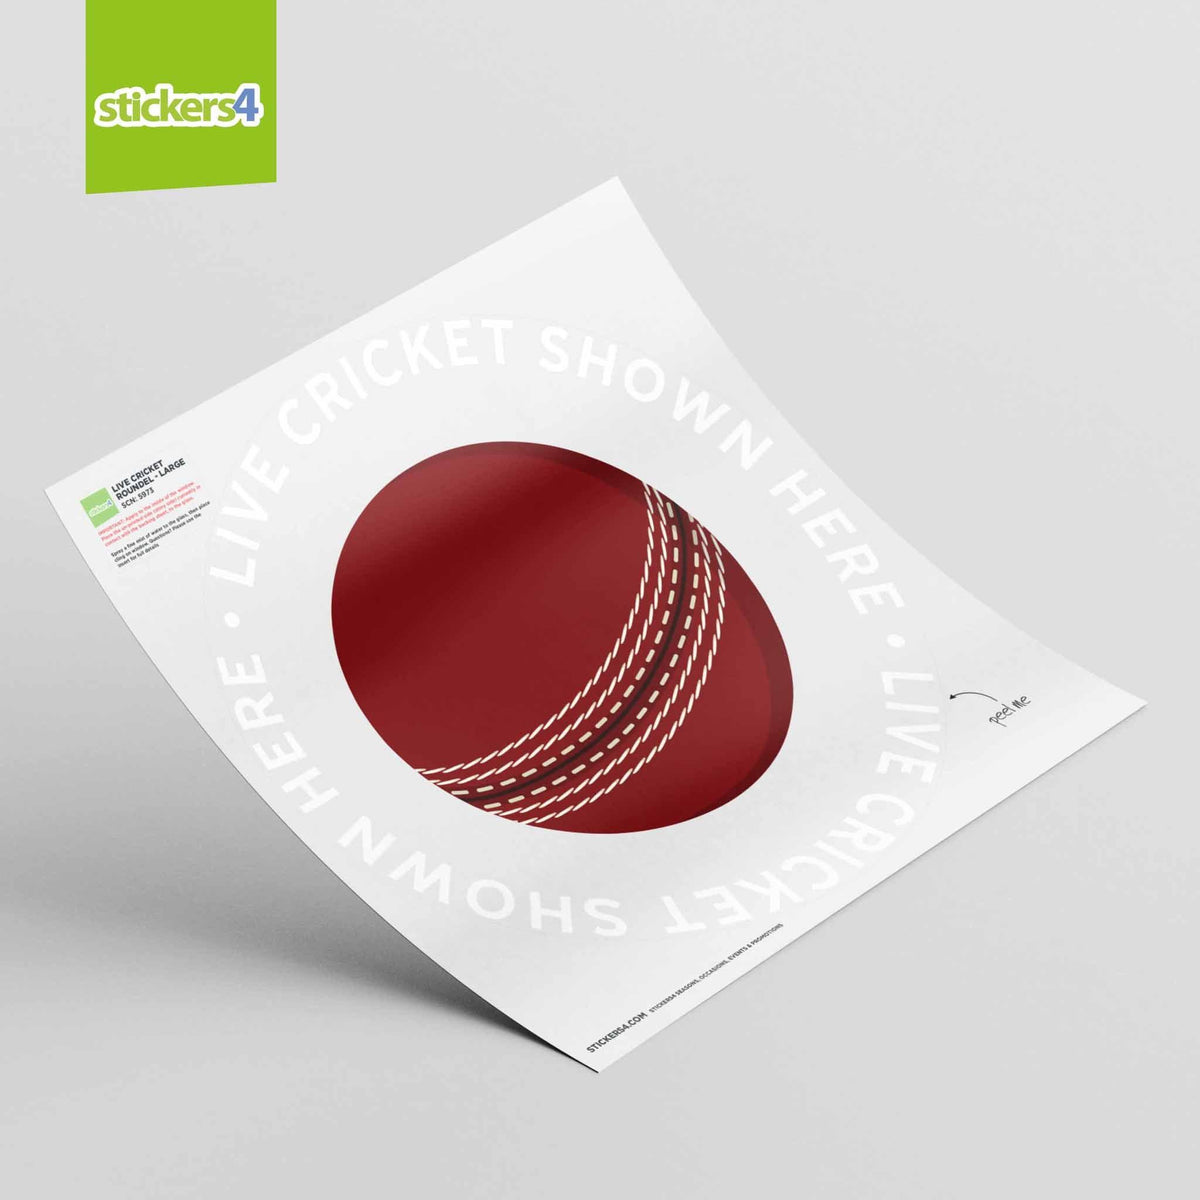 &quot;Live Cricket Shown Here&quot; Roundel Window Sticker Events